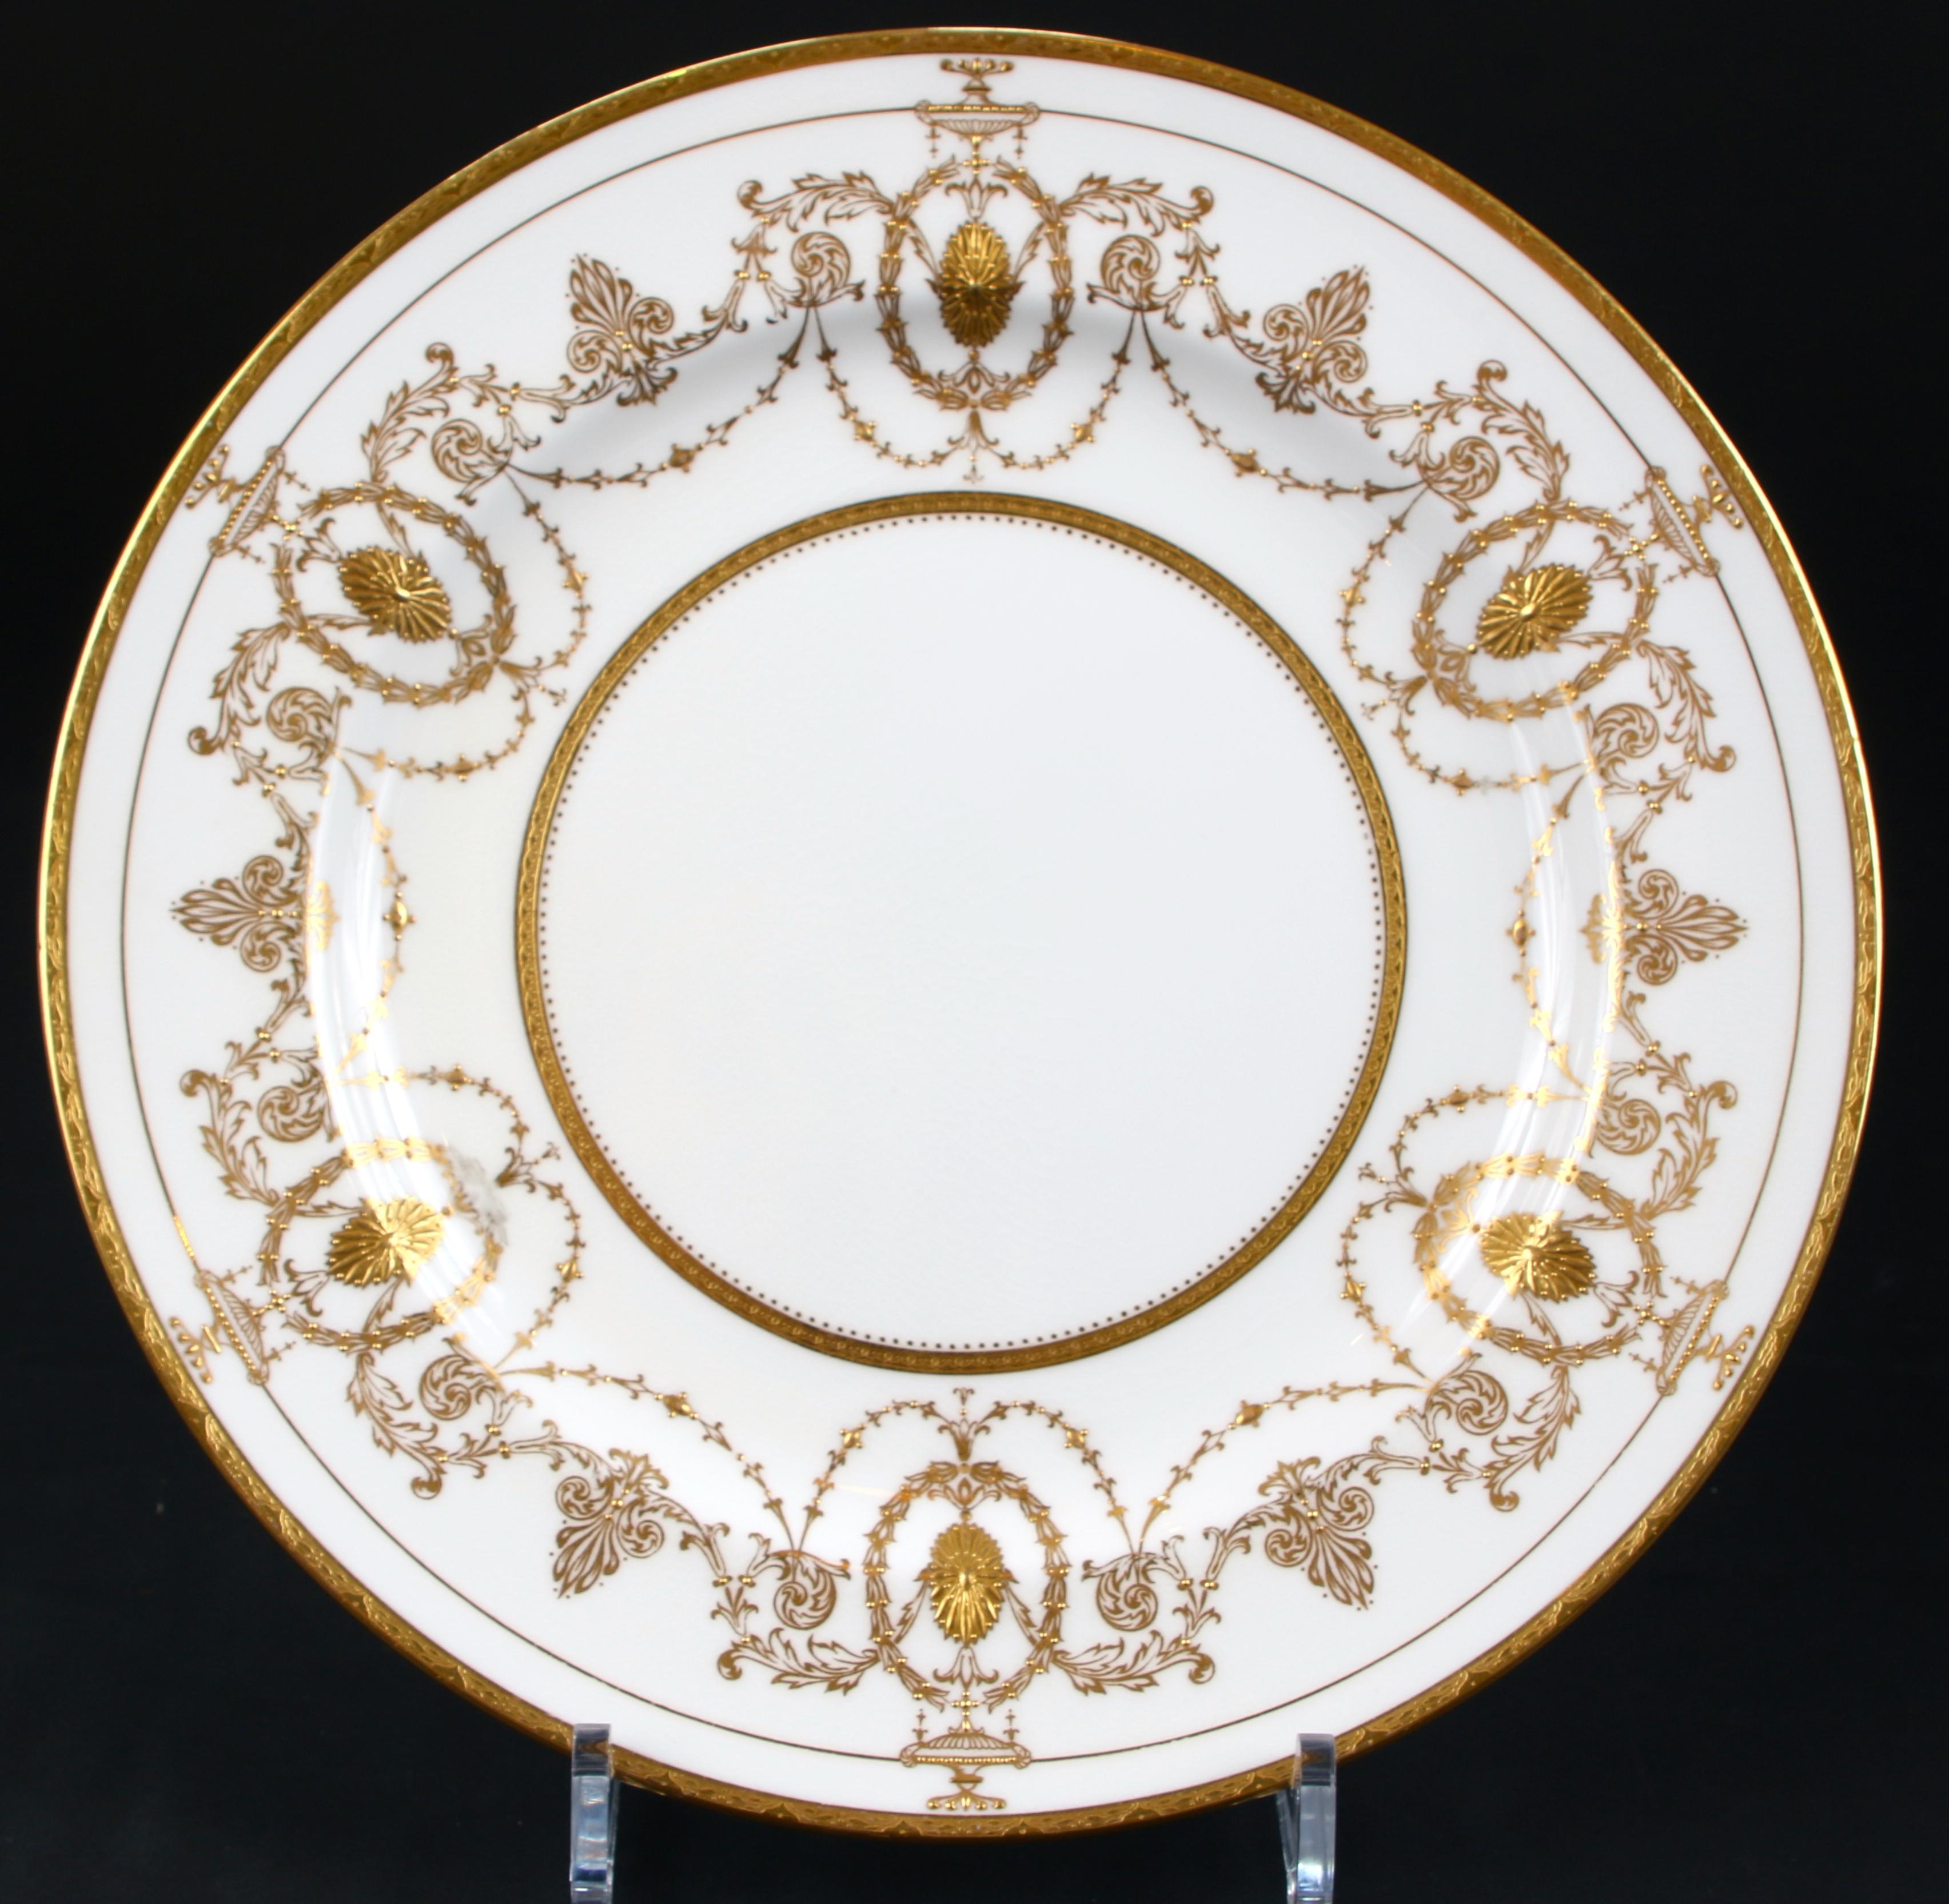 Antique Minton, Stoke-on-Trent, England, Adam-style plates, feature encrusted medallions and urns linked by foliate swags with s gold beading, Pattern H528, one of Minton's famous 